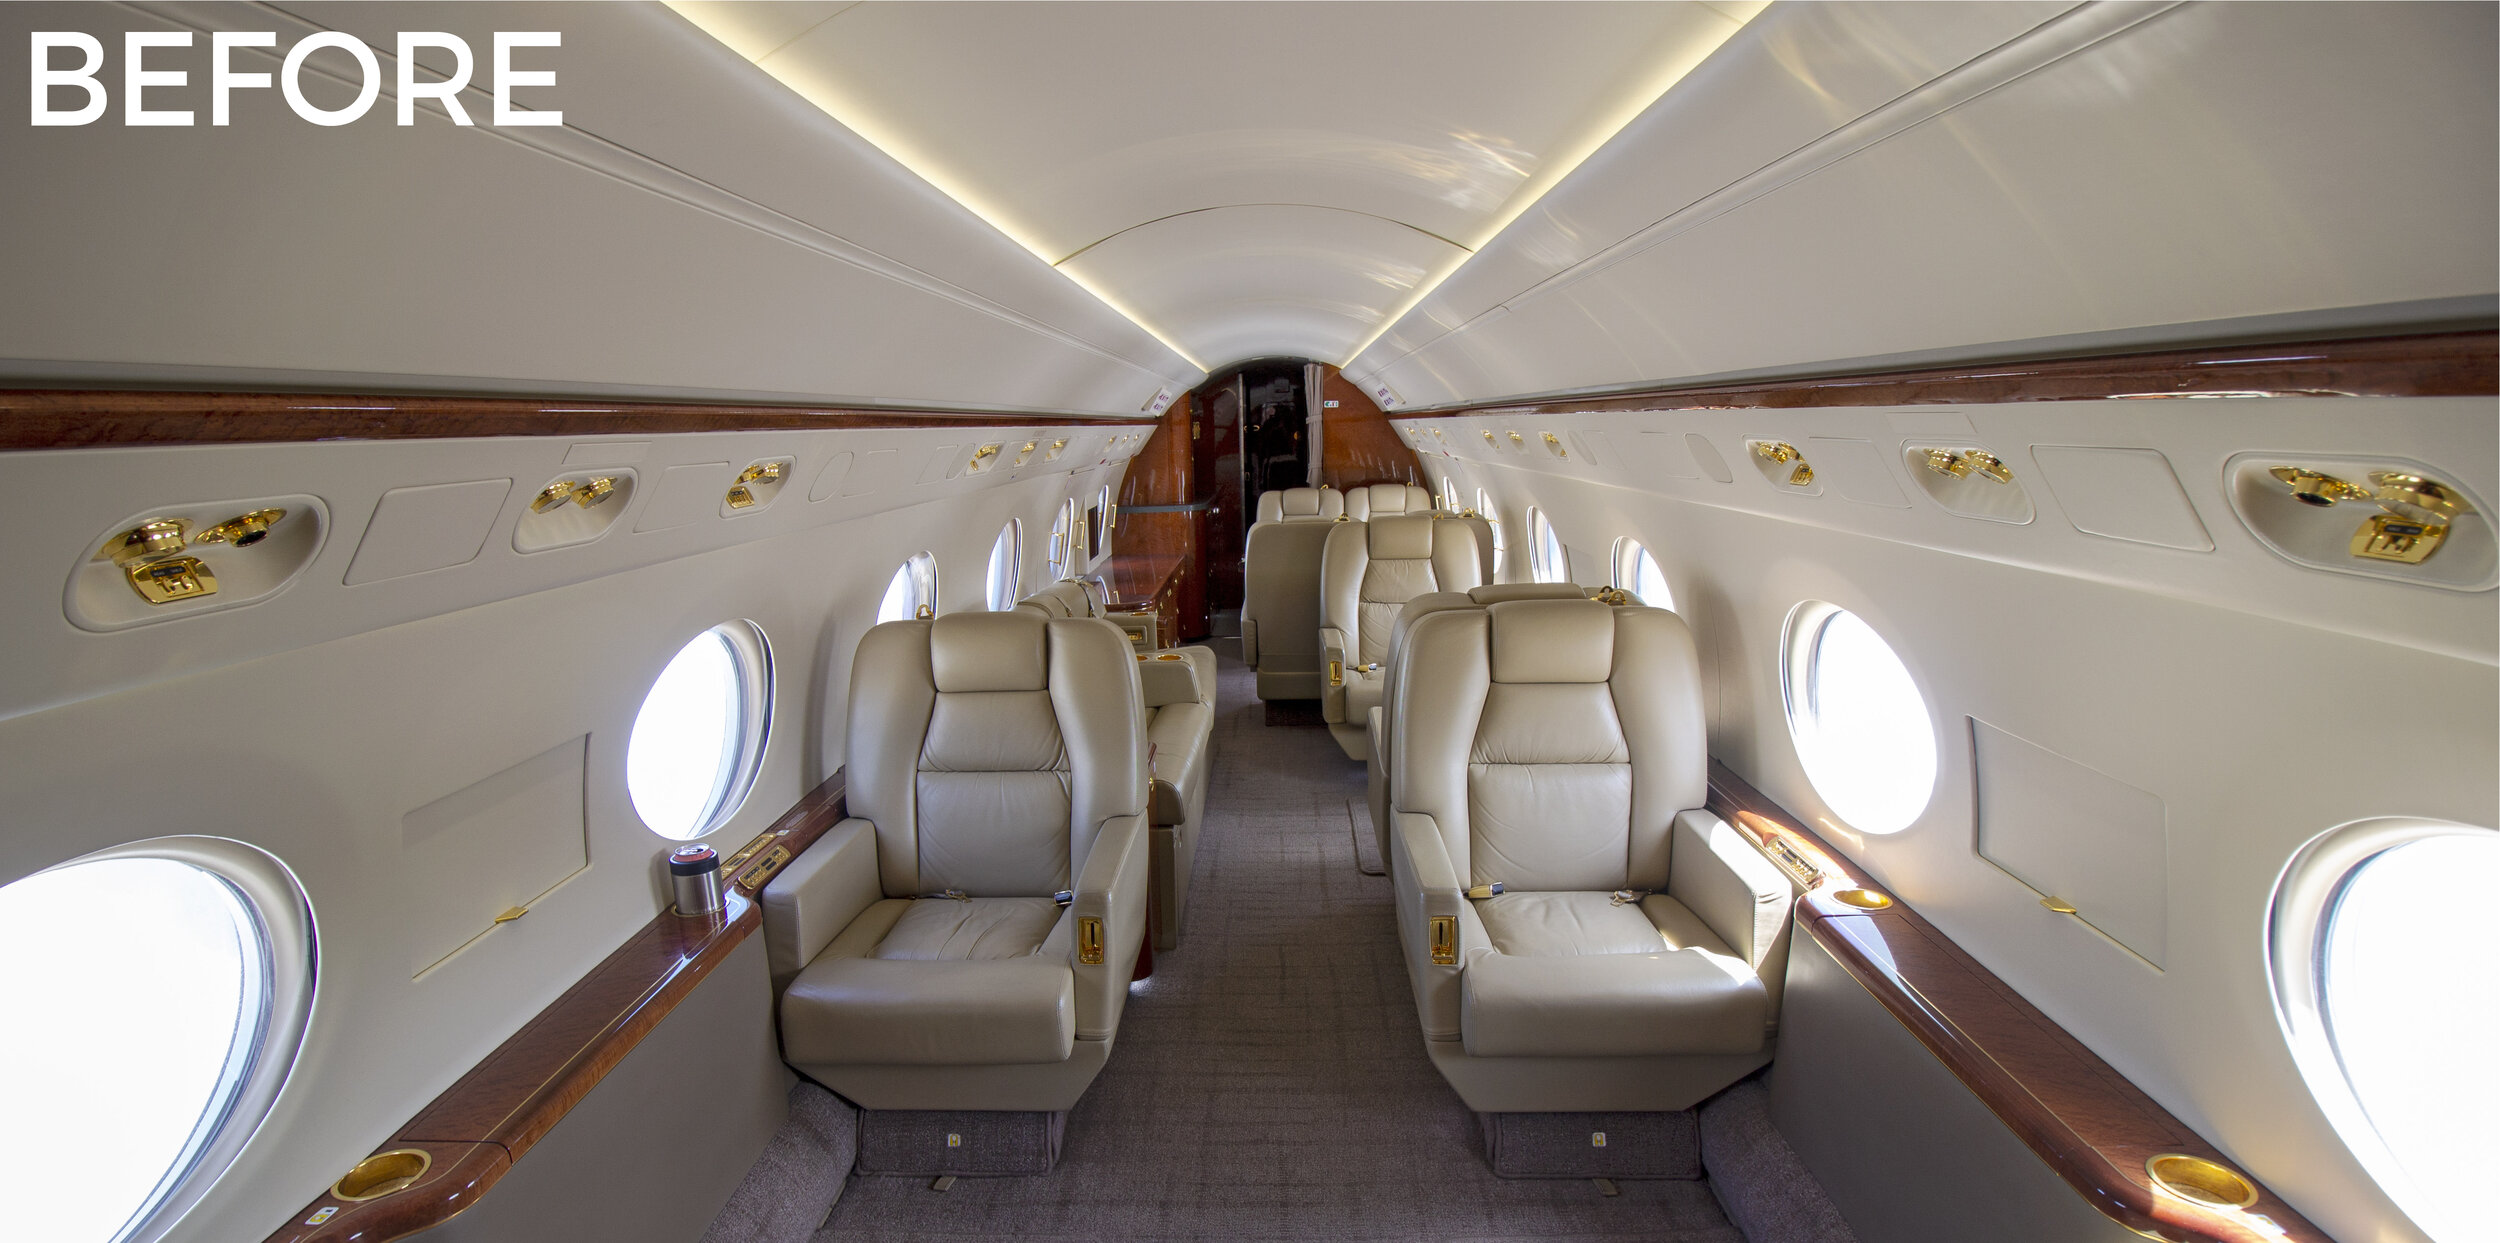 G550 Before For Slider With Text-01.jpg